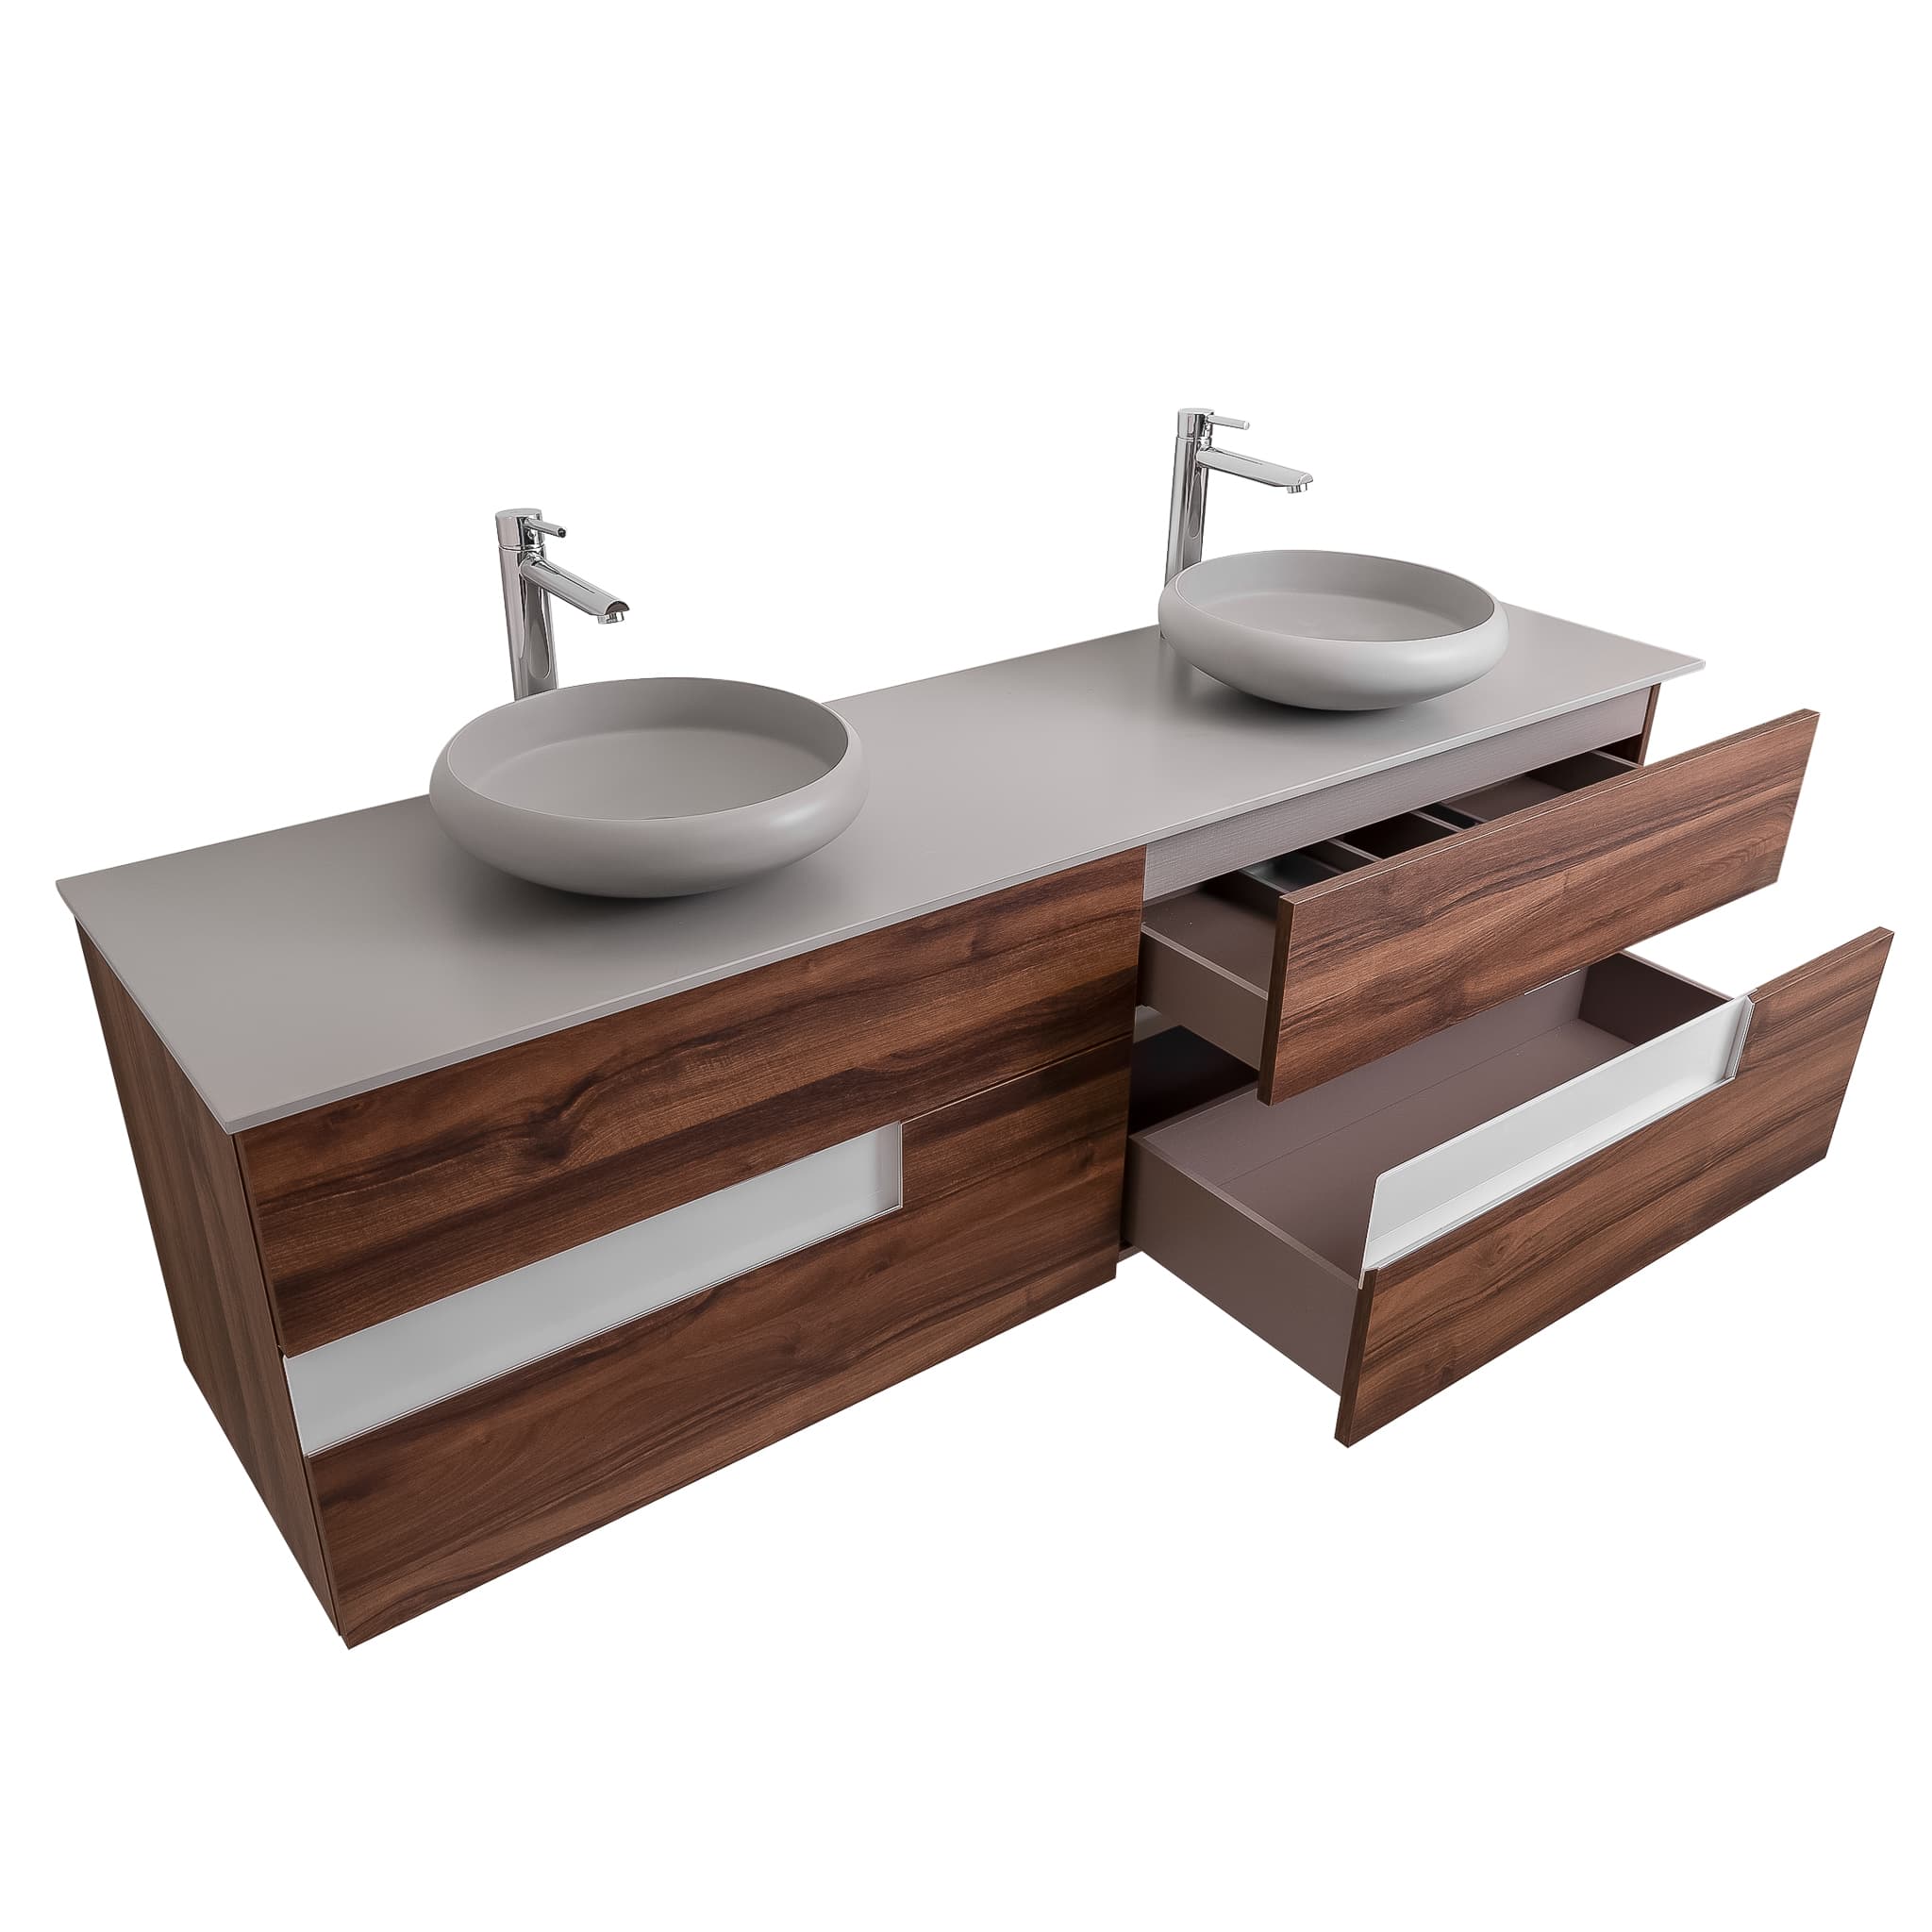 Vision 72 Valenti Medium Brown Wood Cabinet, Solid Surface Flat Grey Counter And Two Round Solid Surface Grey Basin 1153, Wall Mounted Modern Vanity Set